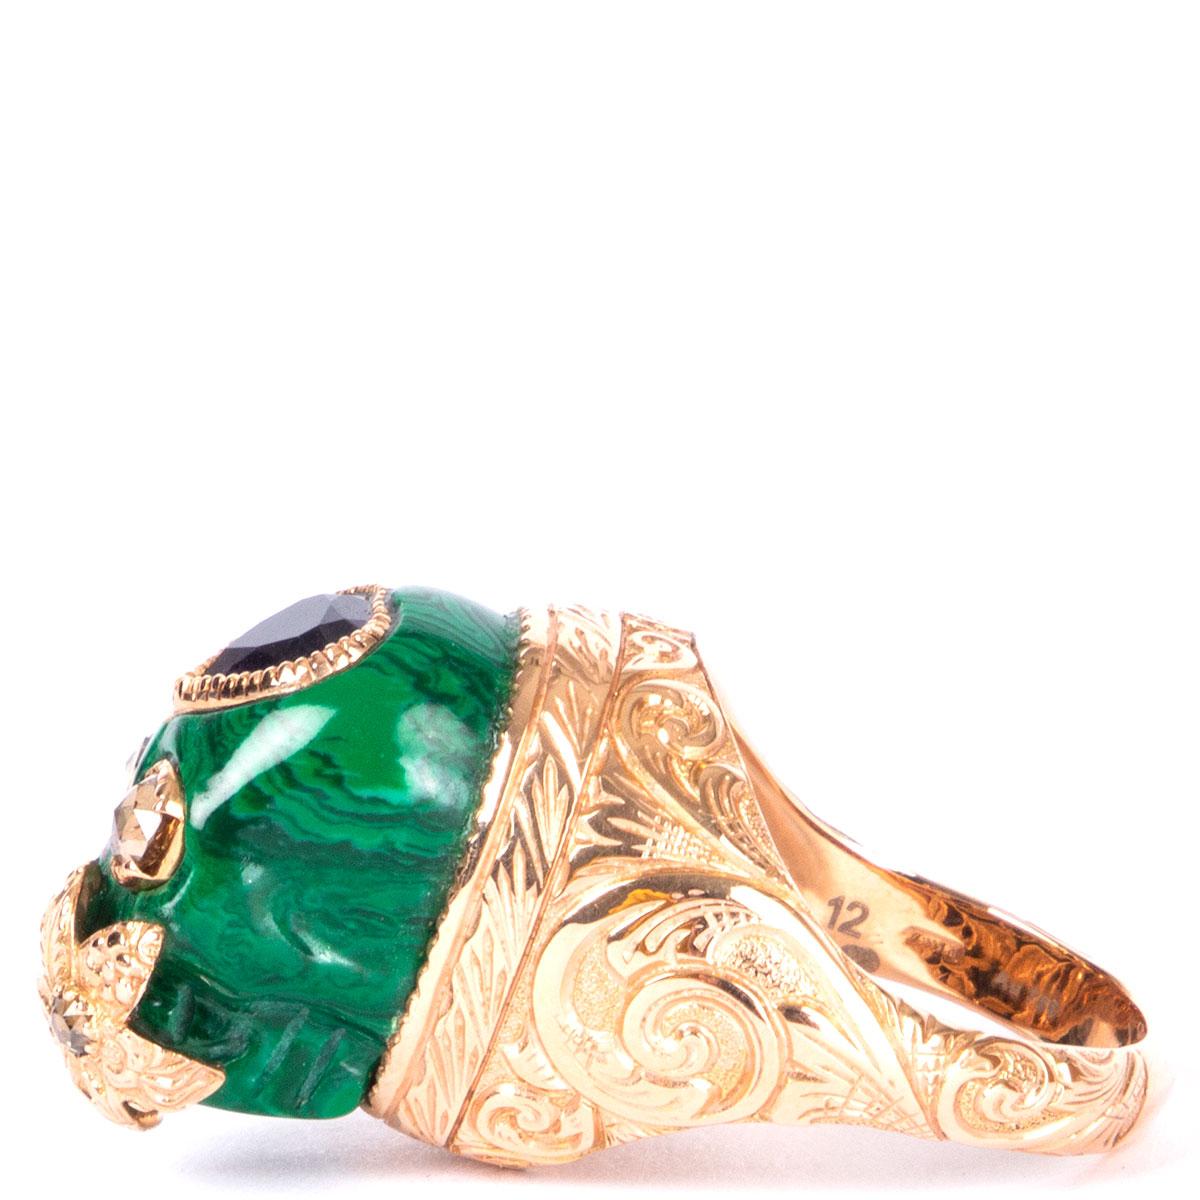 100% authentic Gucci skull ring in 18ct rose gold with synthetic malachite, sapphire and diamonds. Has been worn and is in excellent condition.

Size 6
Depth 3cm (1.2in)
Length 2cm (0.8in)
Hardware 18ct Rose Gold

All our listings include only the